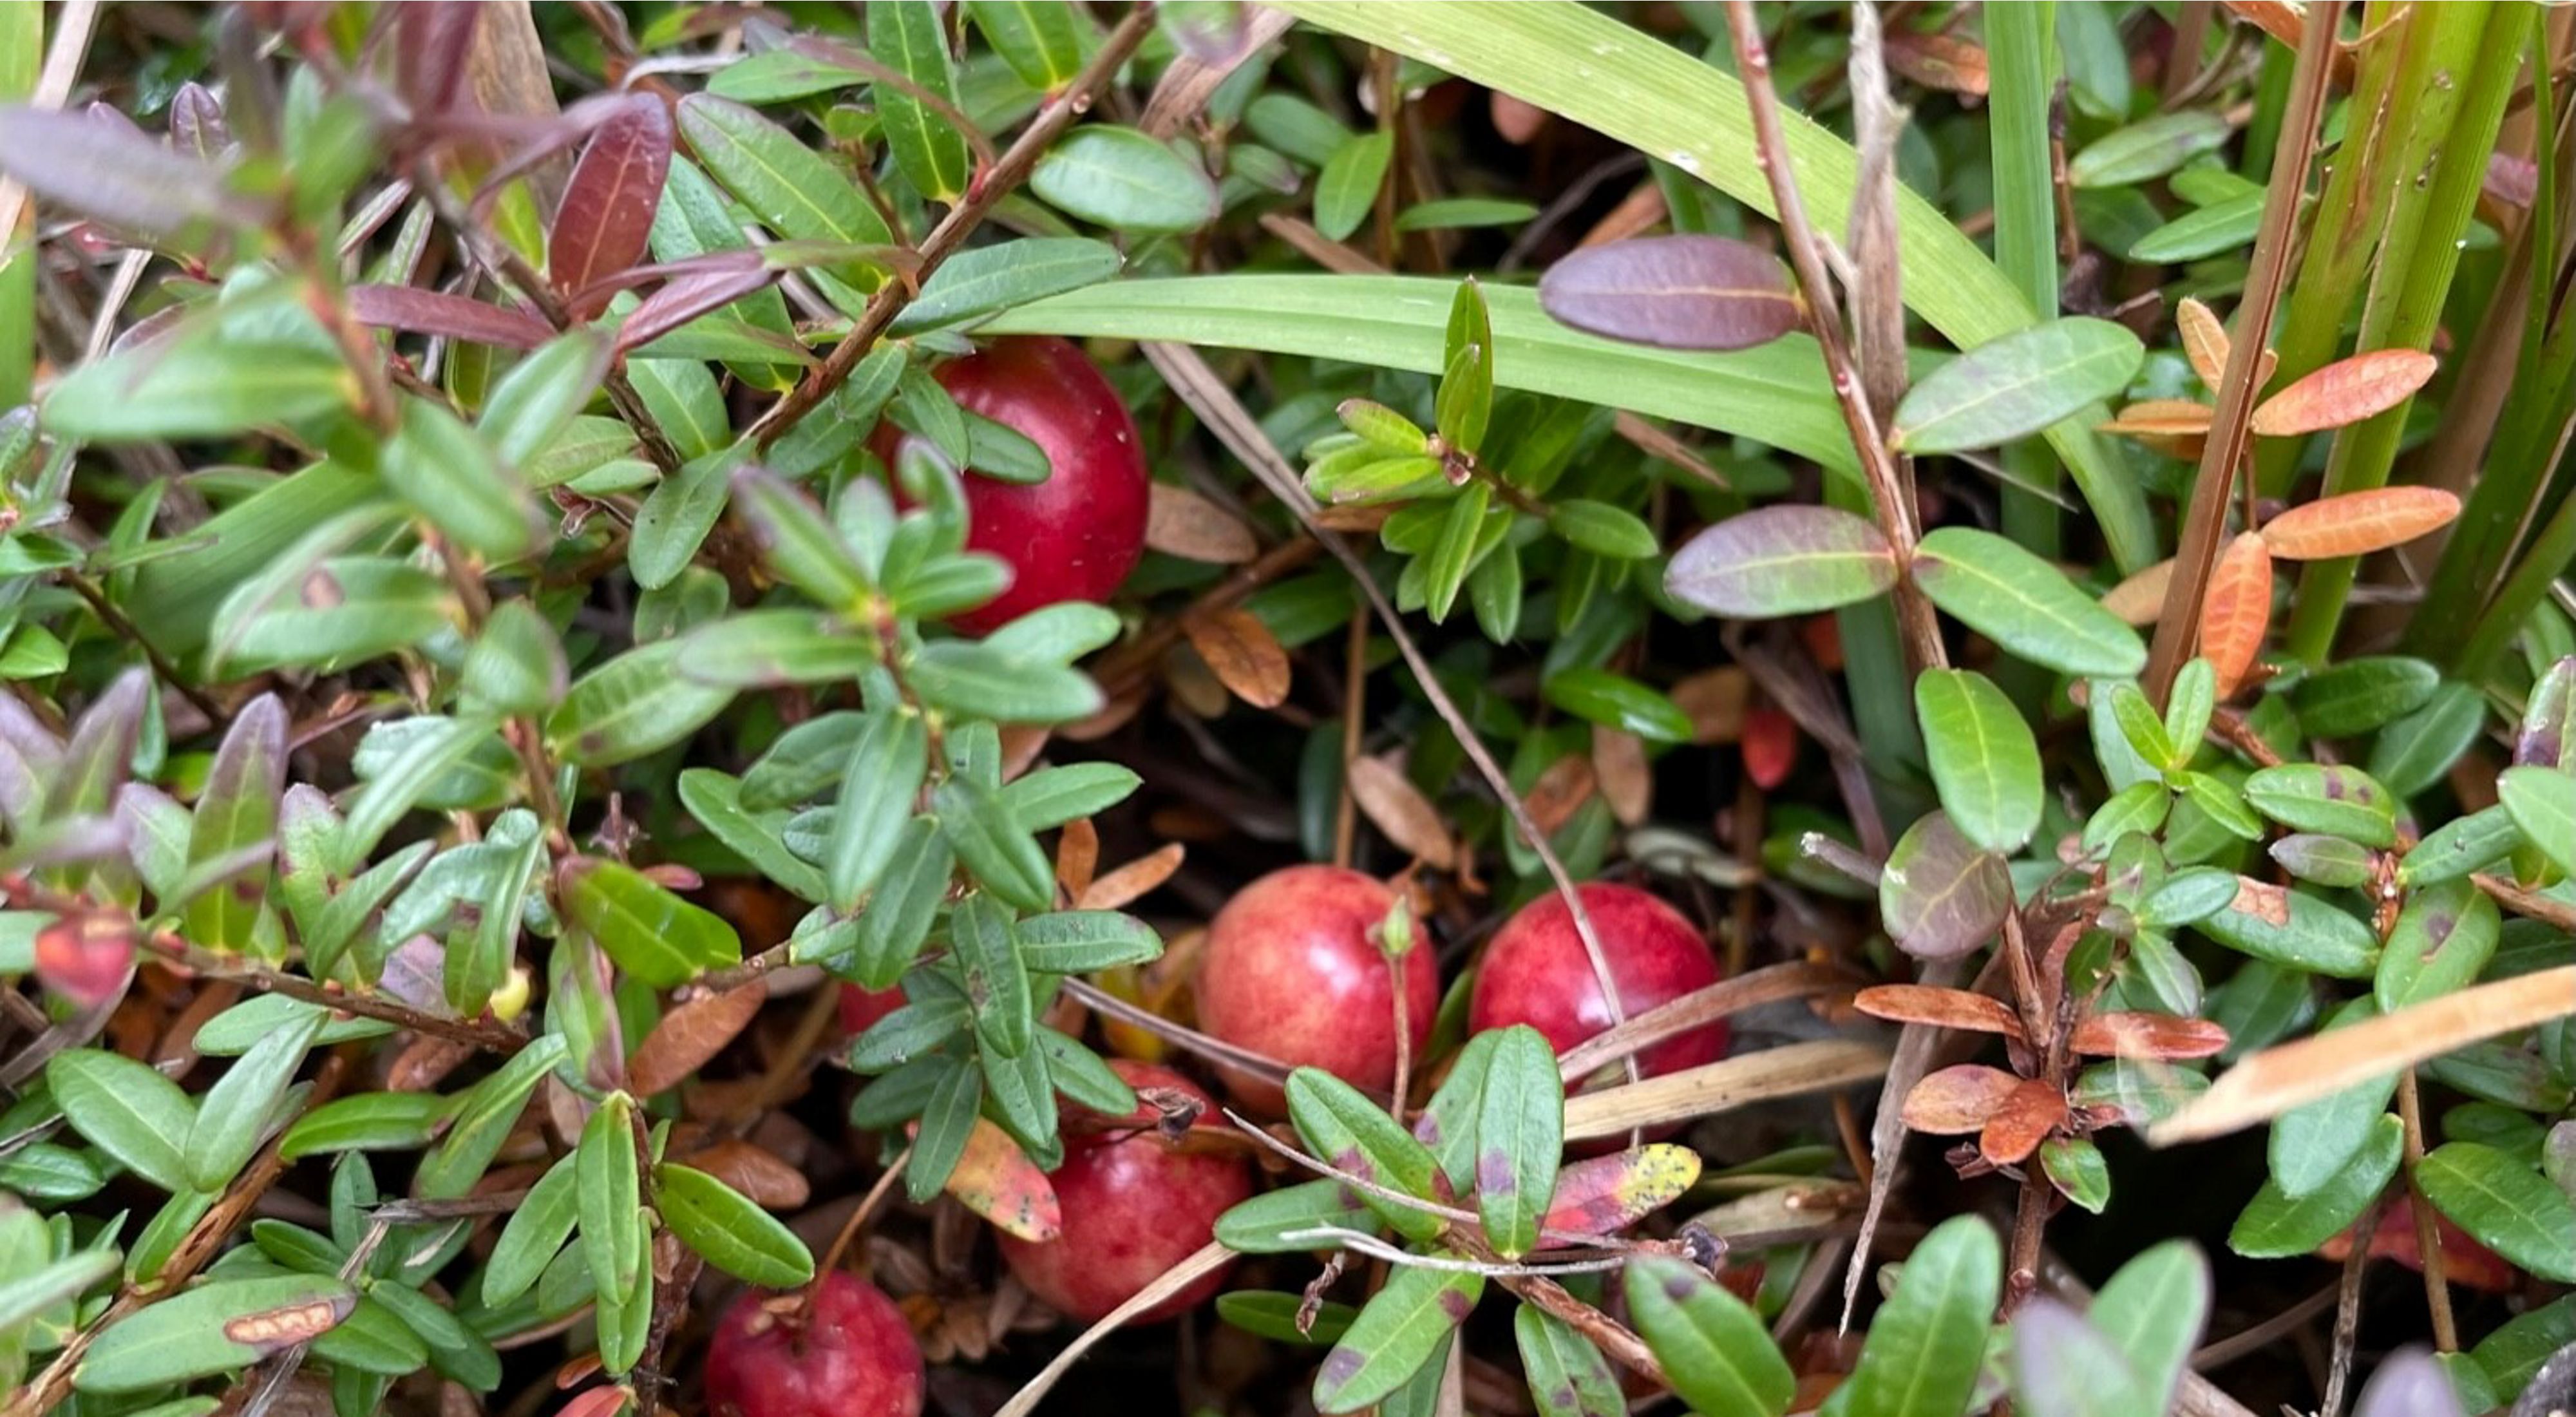 Red berries are nestled under green leaves.